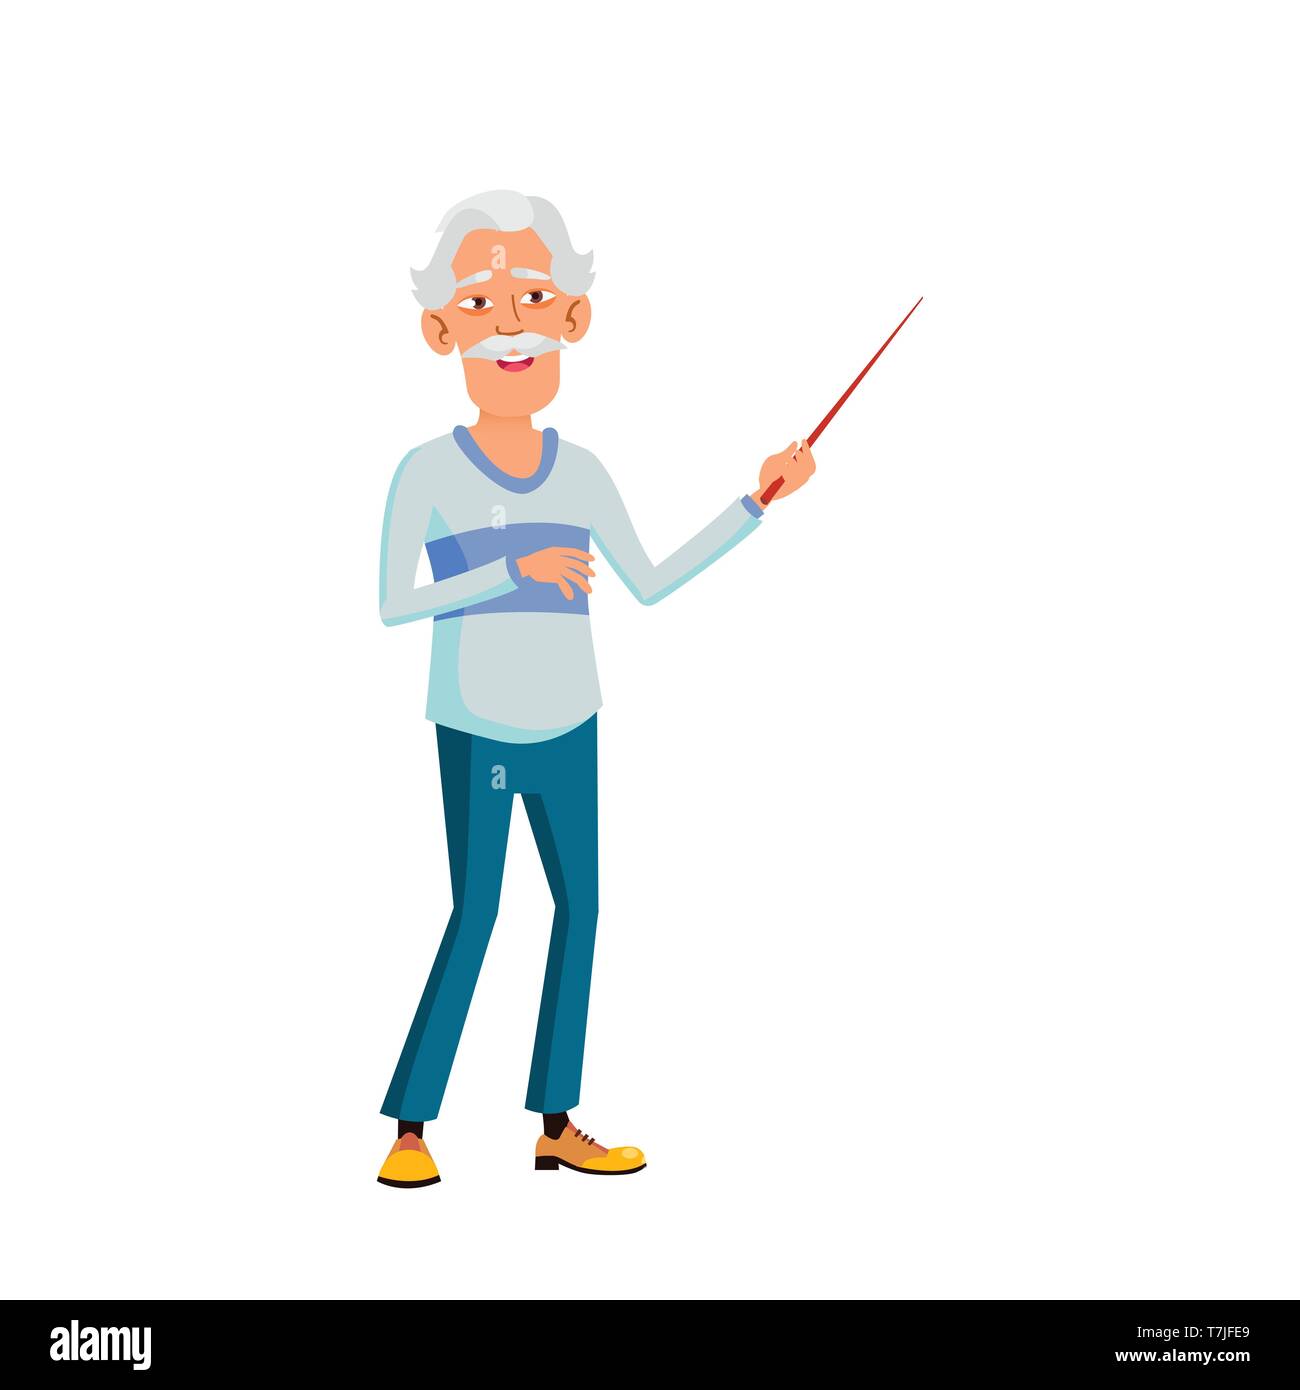 Asian Old Man Vector. Elderly People. Senior Person. Aged. Active Grandparent. Isolated Cartoon Illustration Stock Vector